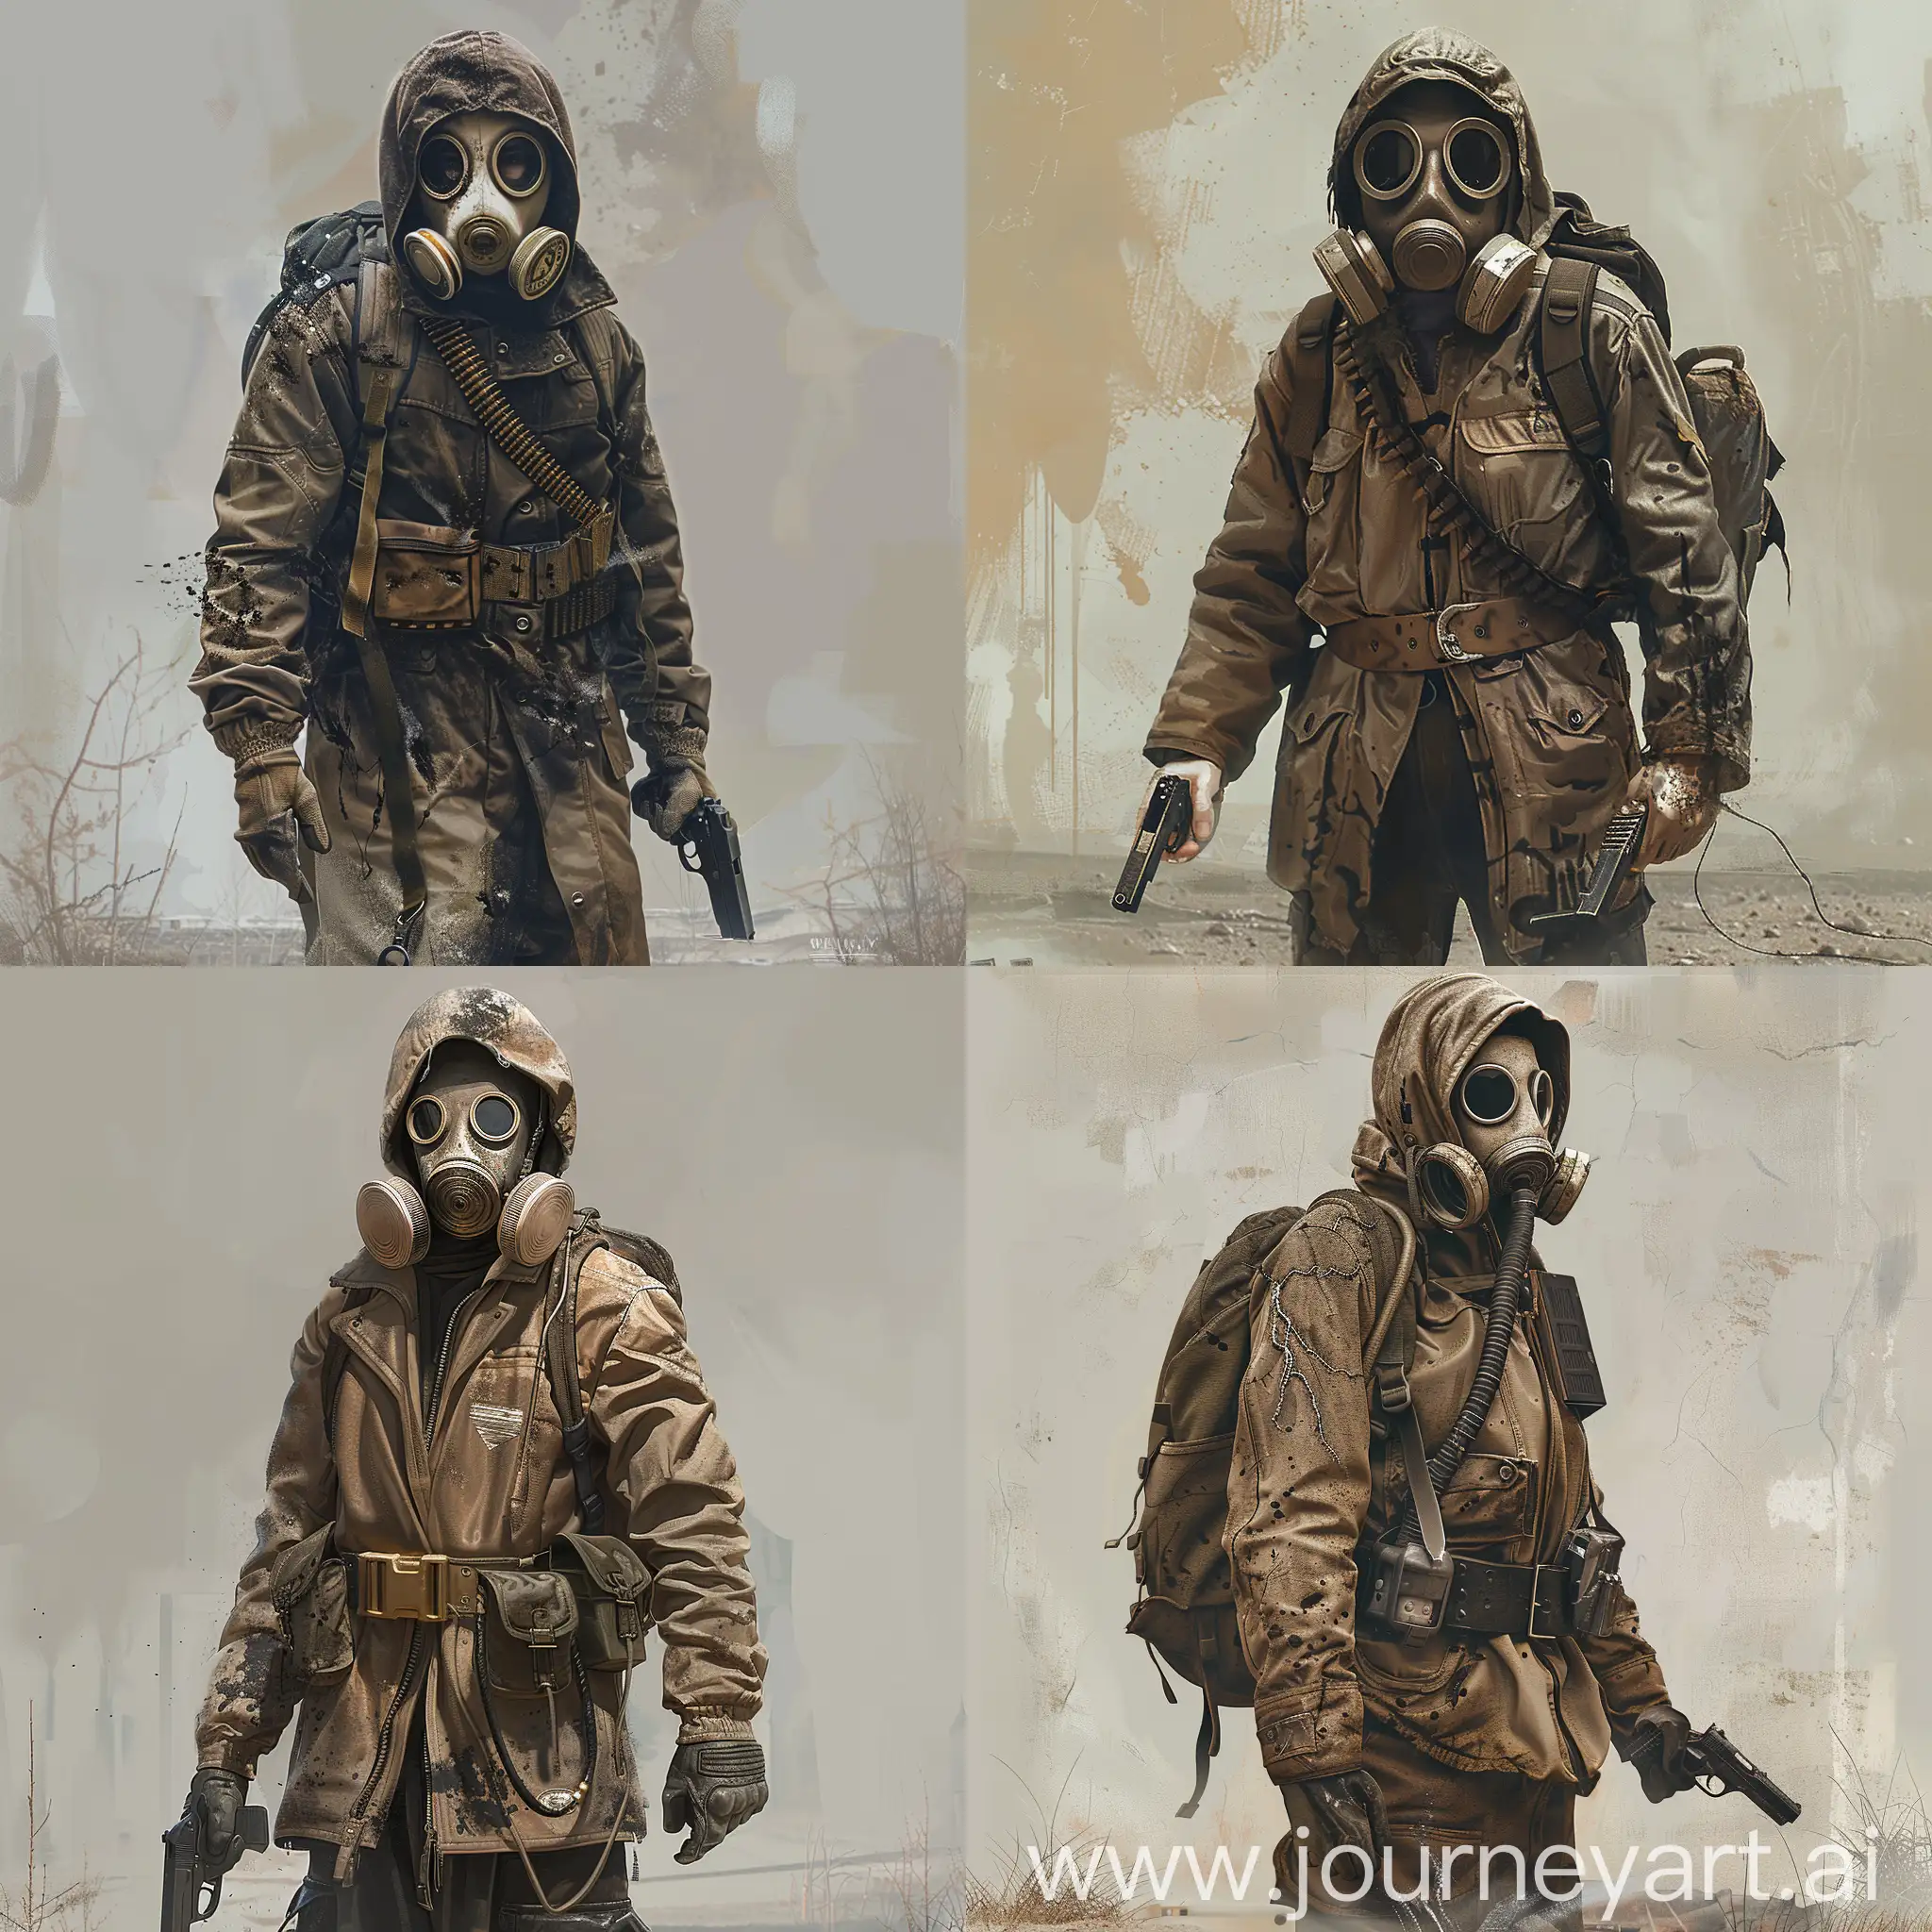 PostApocalyptic-Stalker-in-Gas-Mask-with-Pistol-and-Soviet-Gear